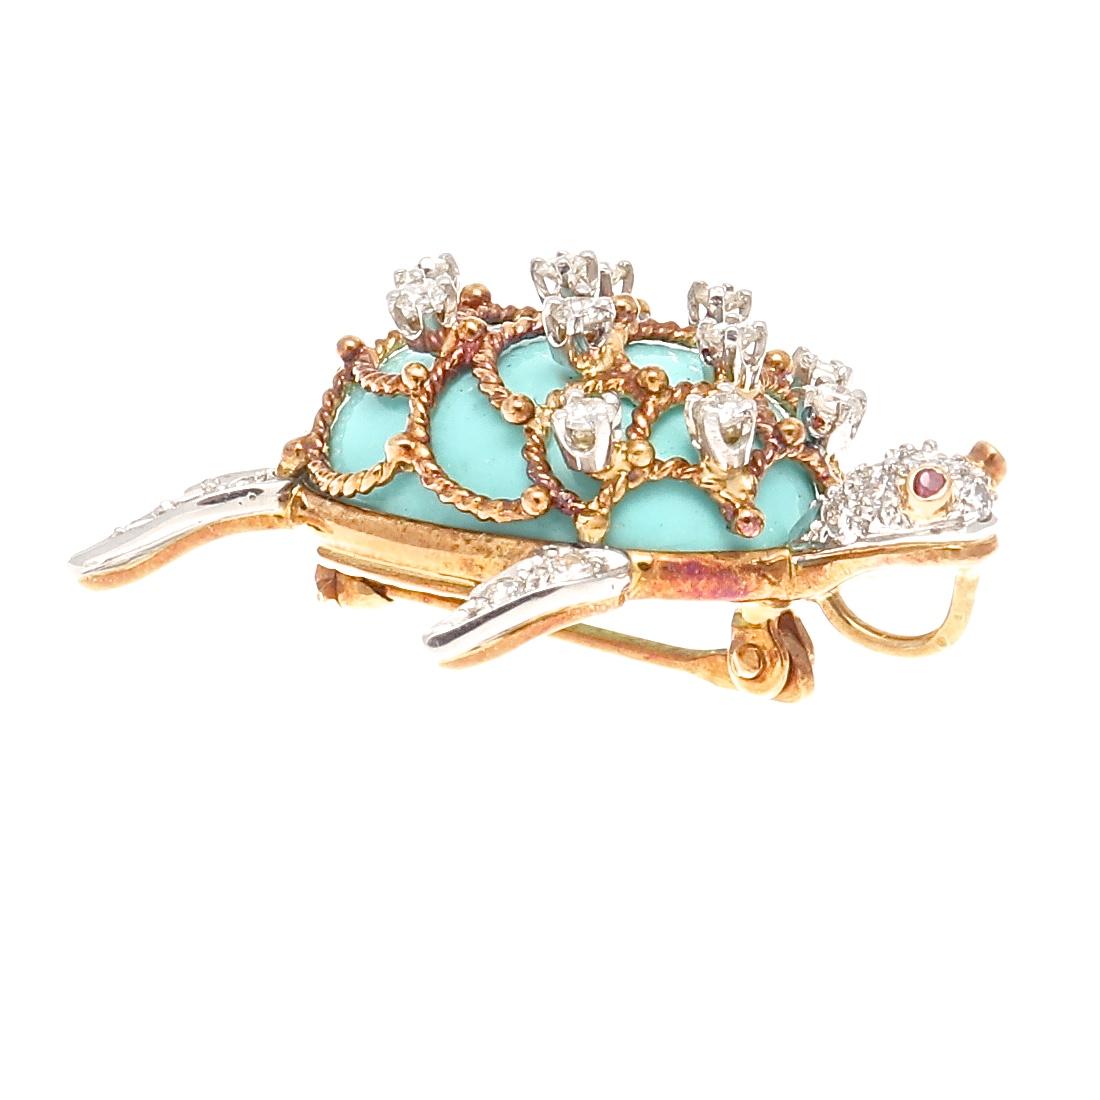 Women's or Men's Hammerman Brothers Turquoise Diamond Gold Brooch